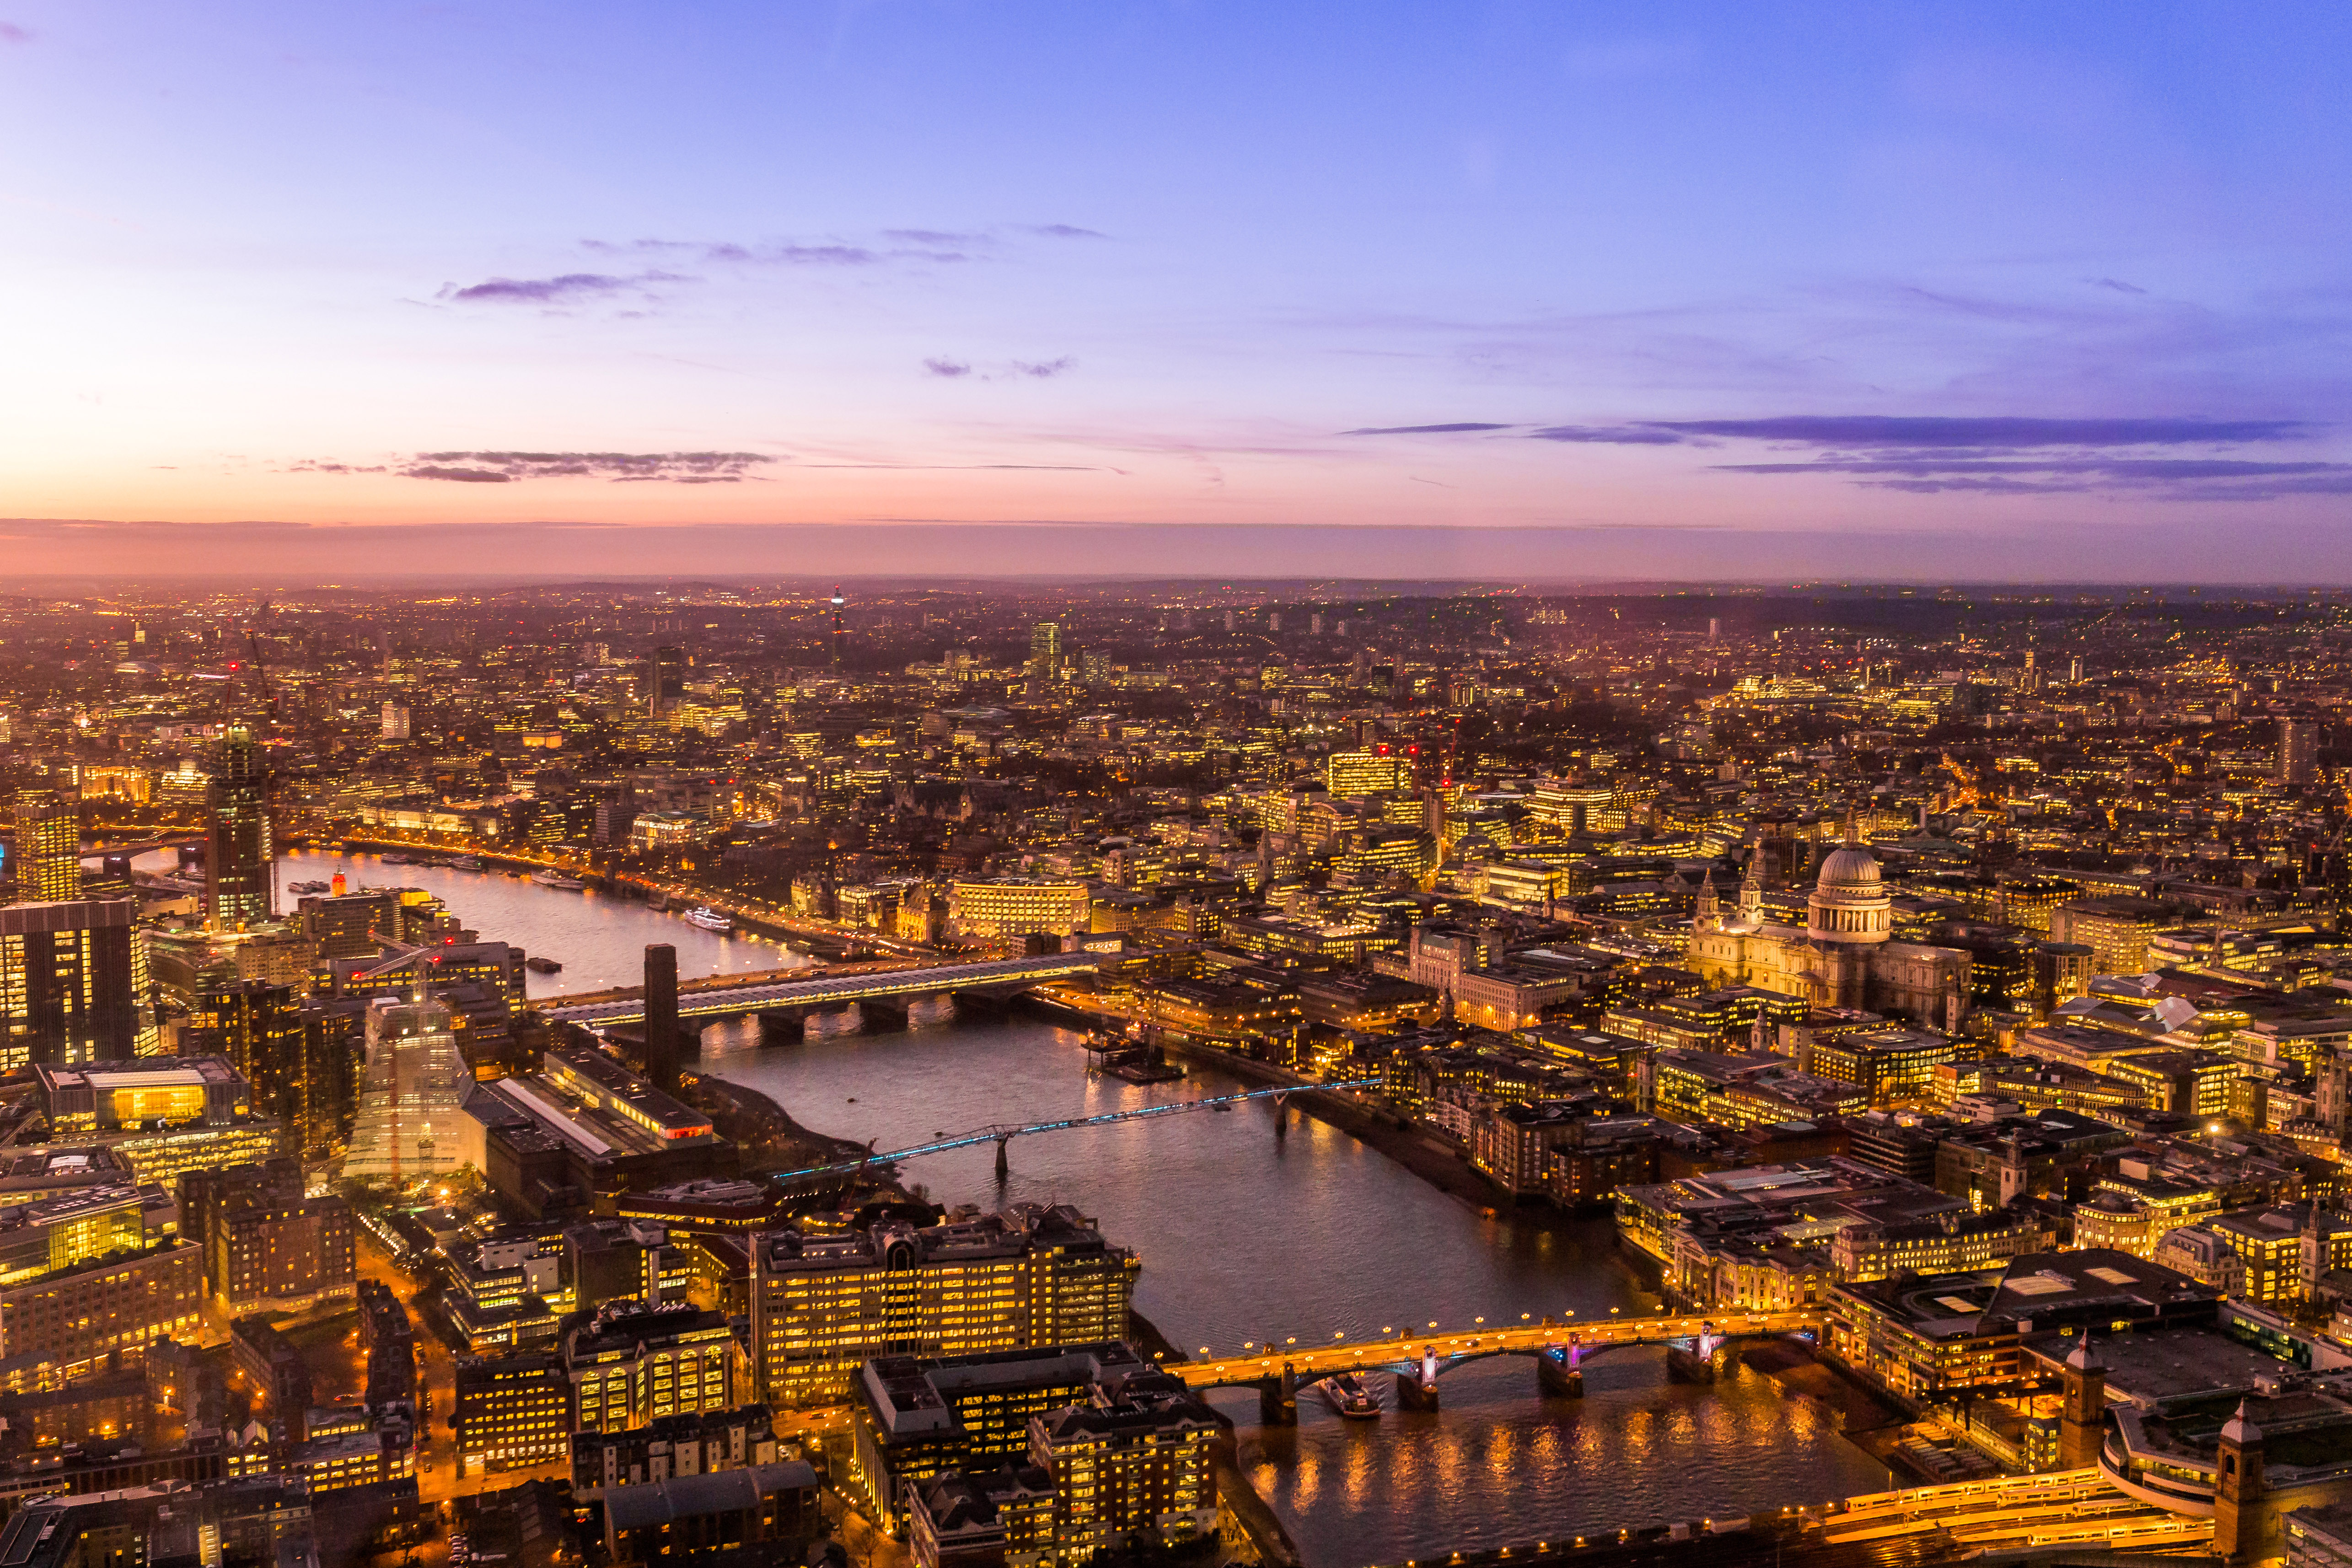 Overlook of the City of London image - Free stock photo - Public Domain